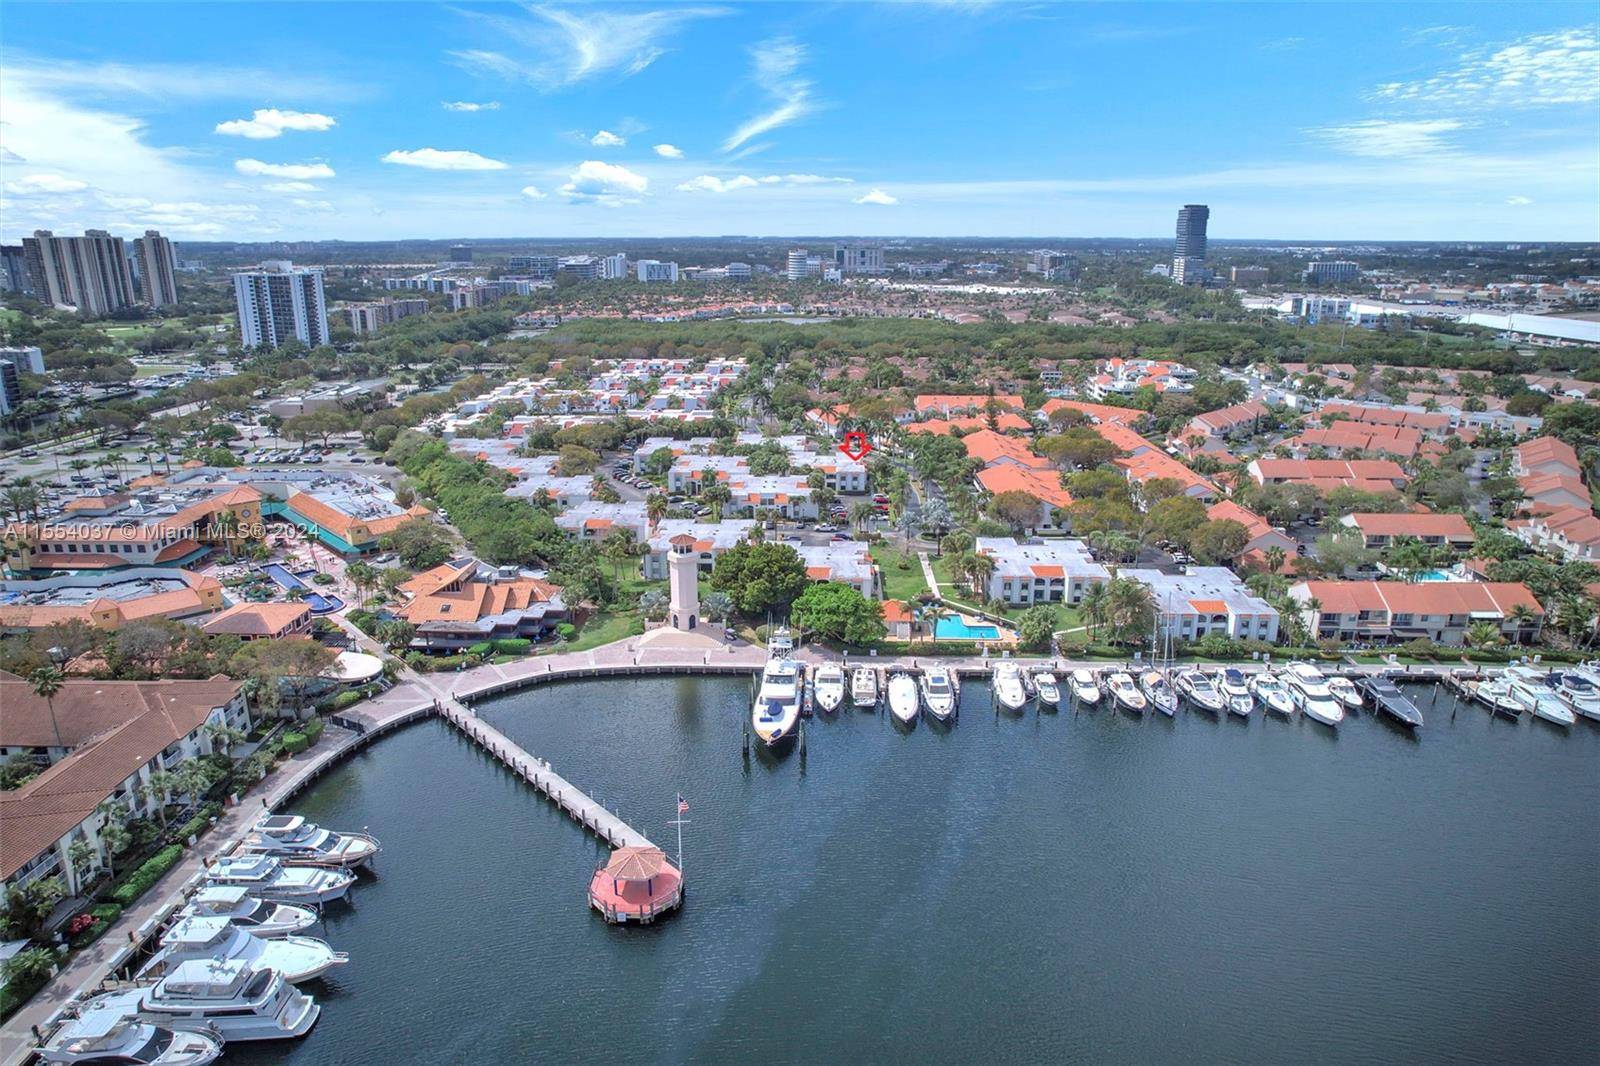 Welcome to Mariner's Village, the highly sought after gated community offering stunning views of the WATERWAYS MARINA.